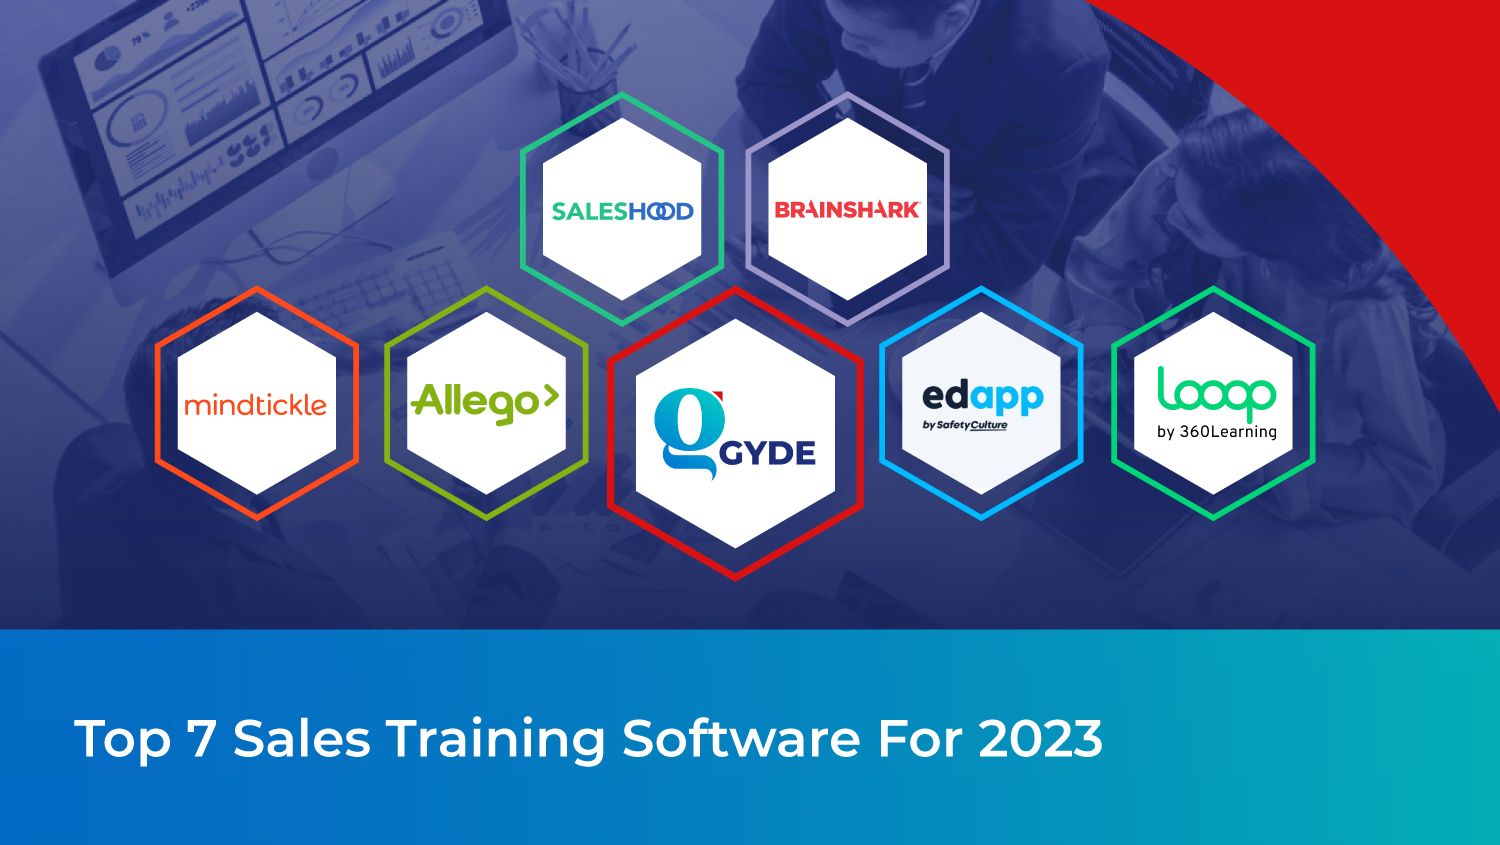 Top 7 Sales Training Software for 2023